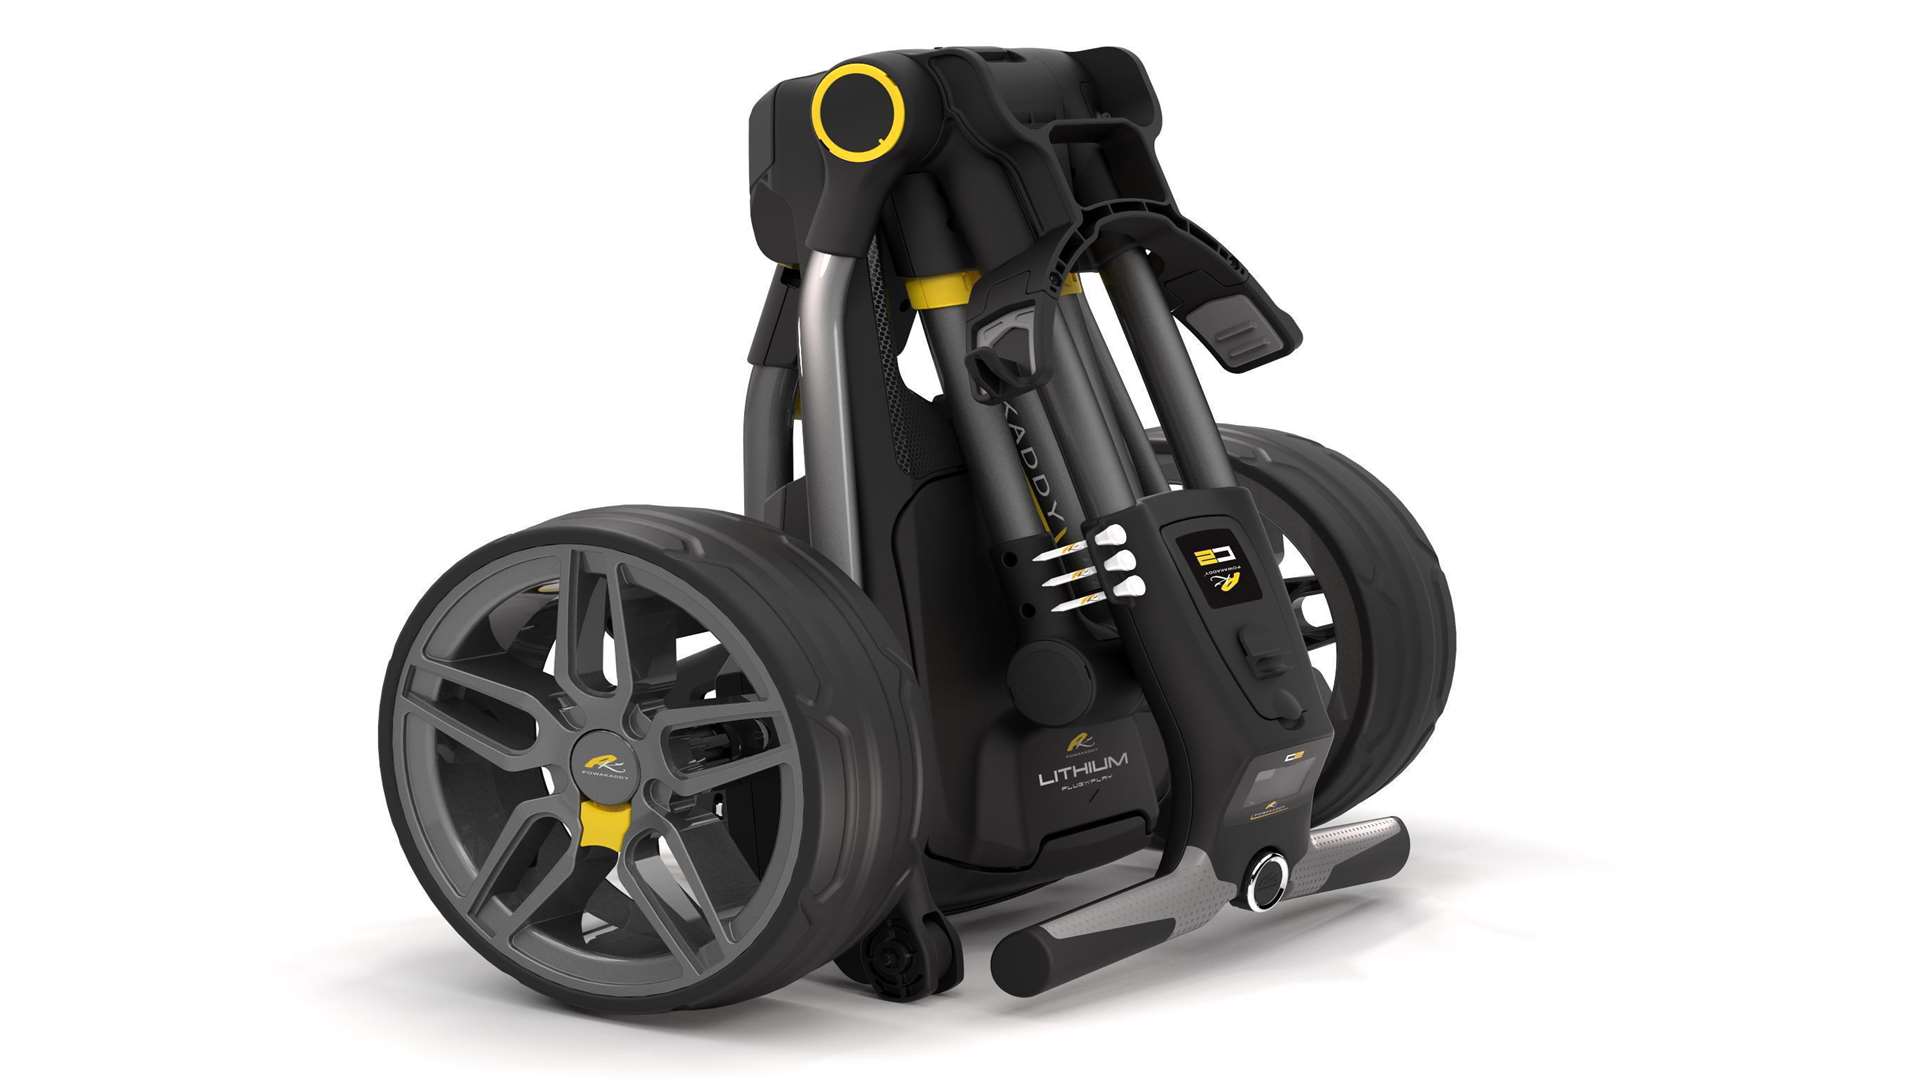 PowaKaddy's new Compact C2 trolley, which only requires two folding actions to assemble